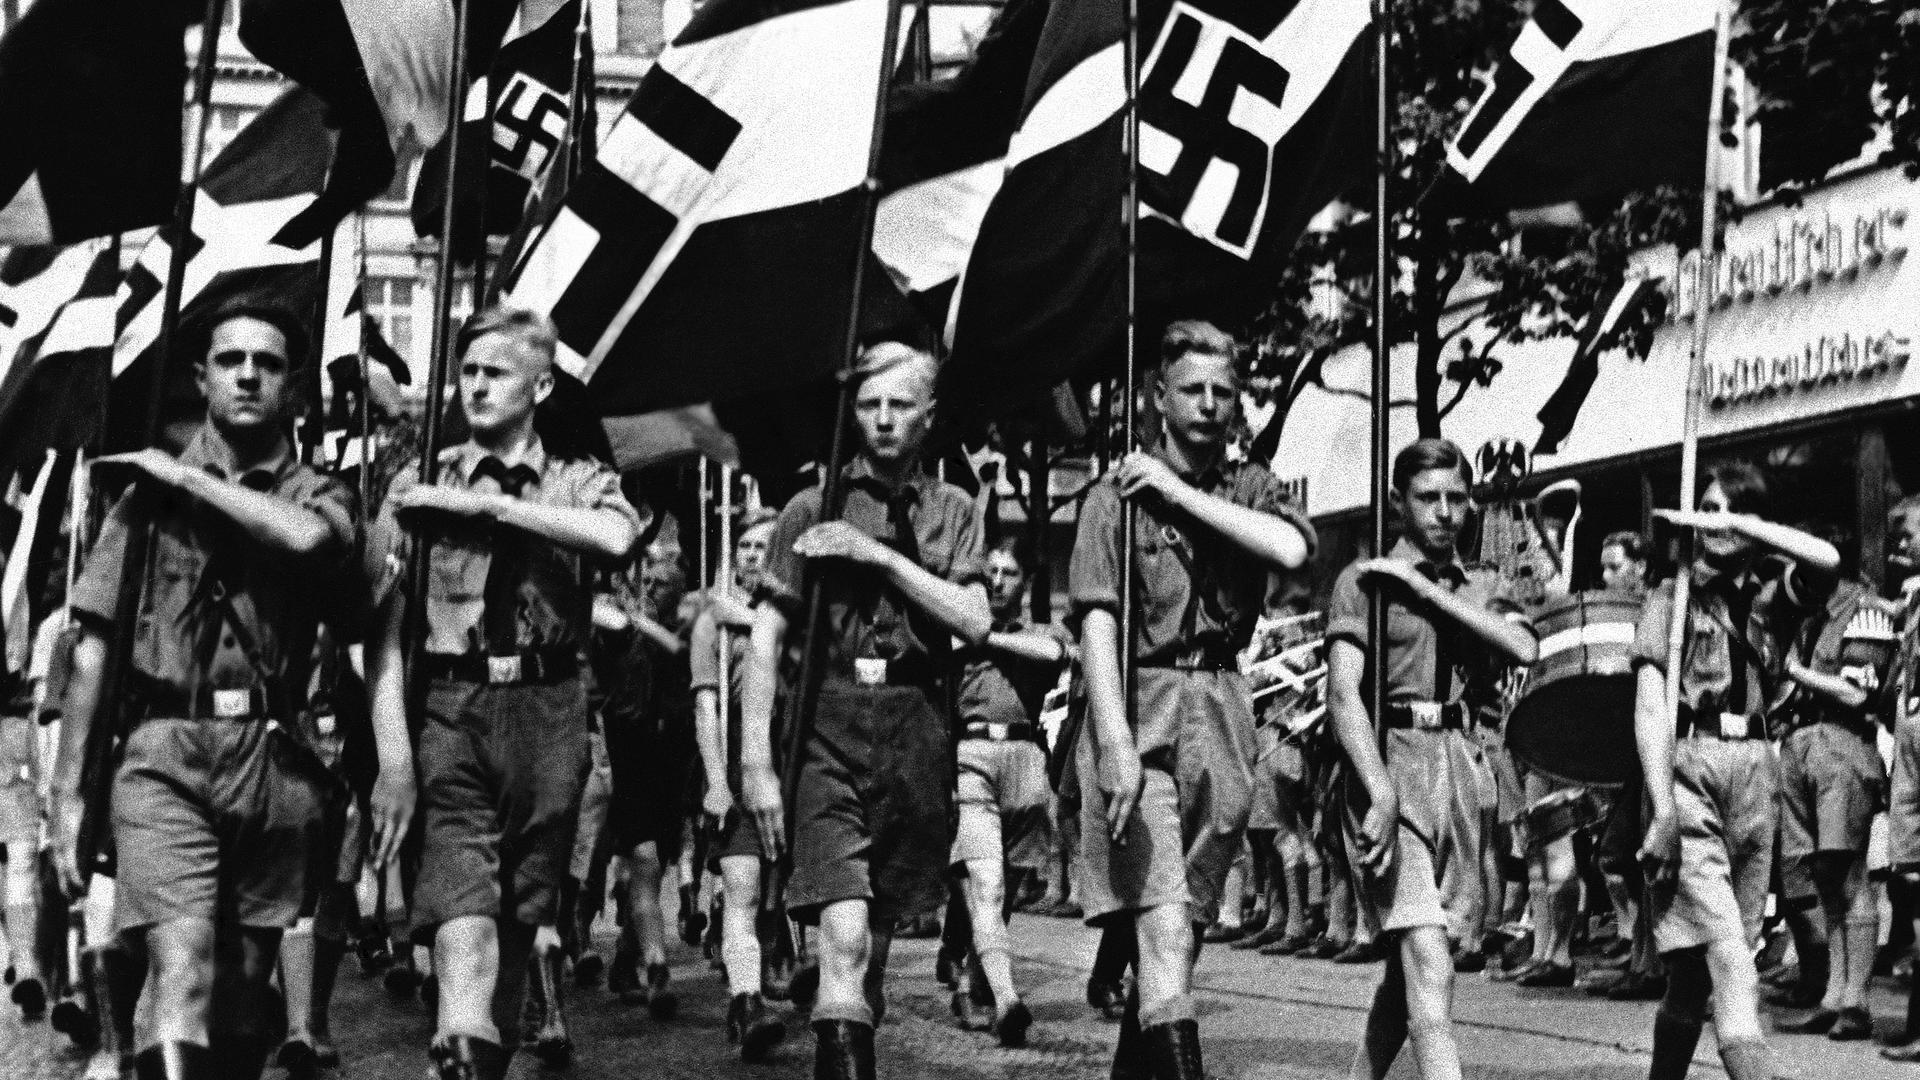 Adolf Hitler's Nazi campaign includes the indoctrination of children in Berlin, Feb. 24, 1936. The boys are trained for future military service and the girls to be obedient hausfraus. Here a group of boys proudly march beneath Nazi standards. 